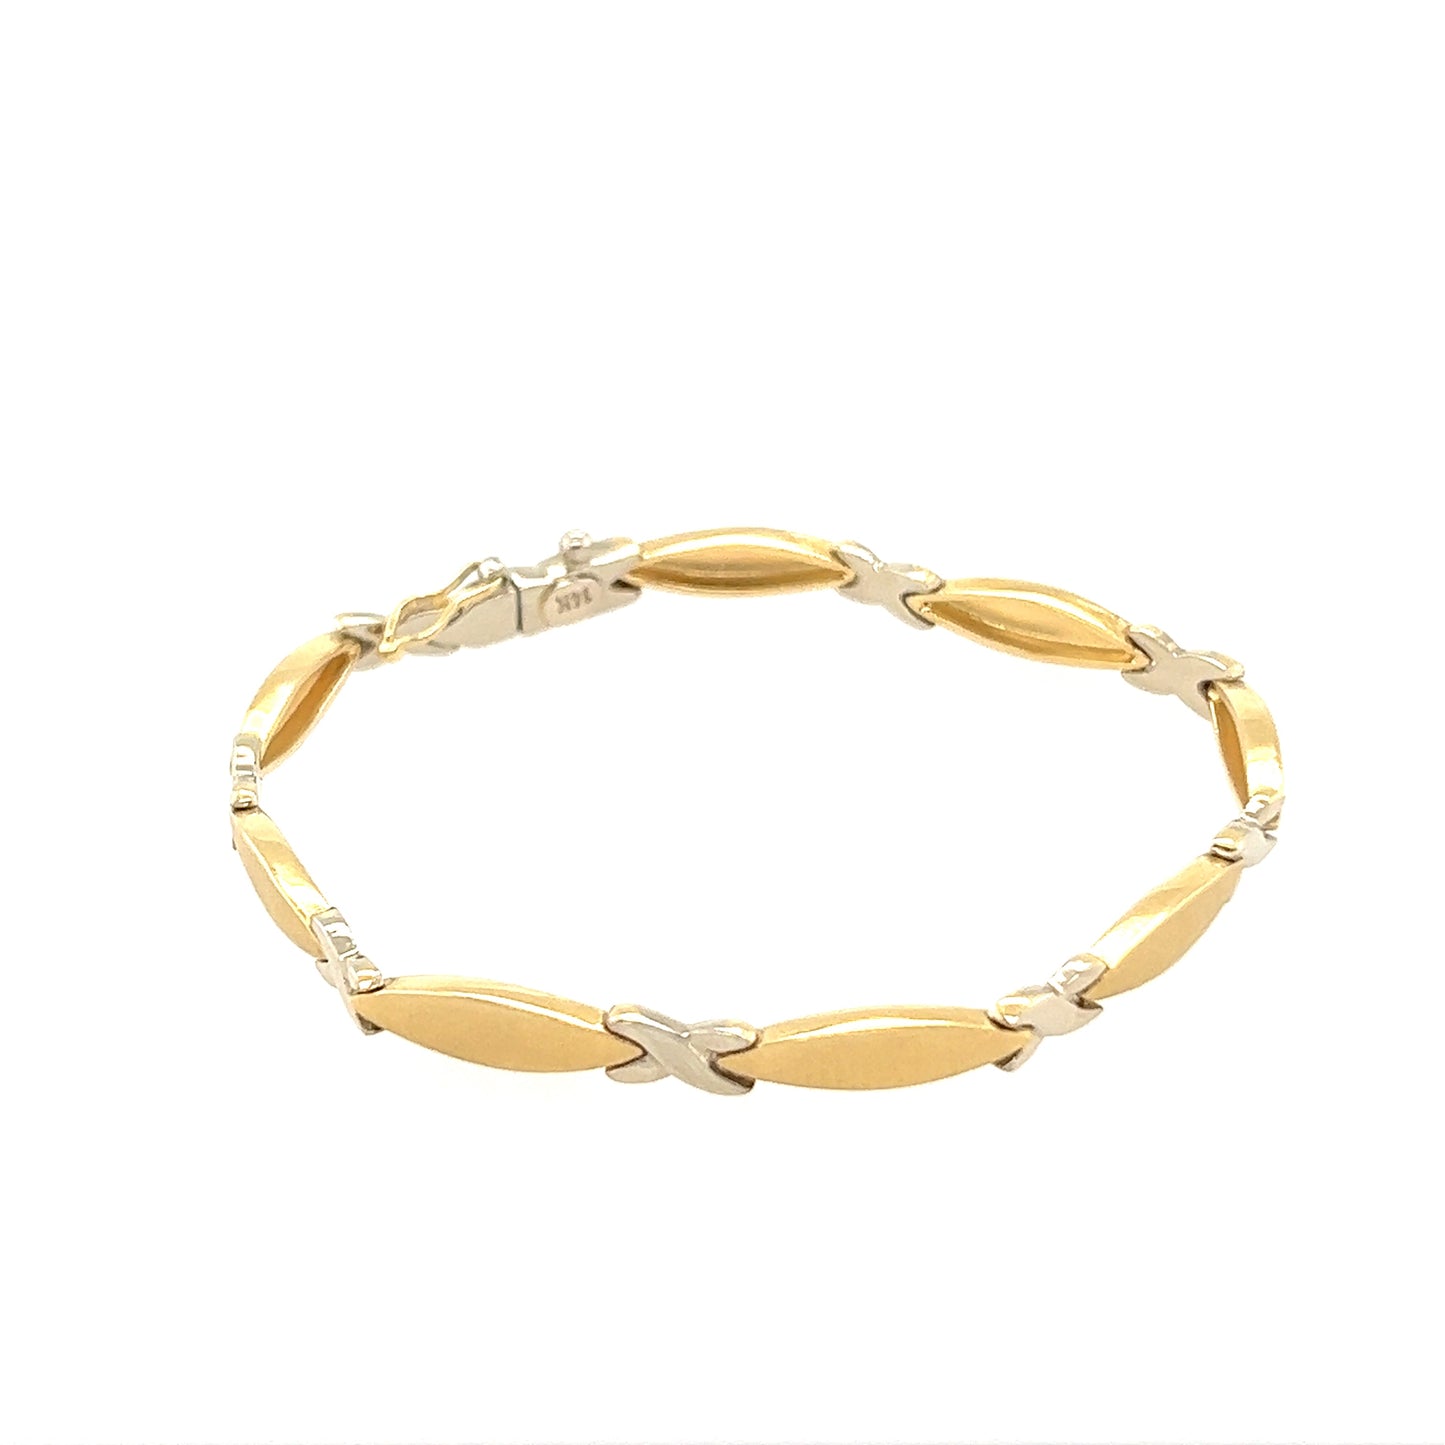 14 k elegant combination Yellow and White Gold Tennis Bracelet from Italy